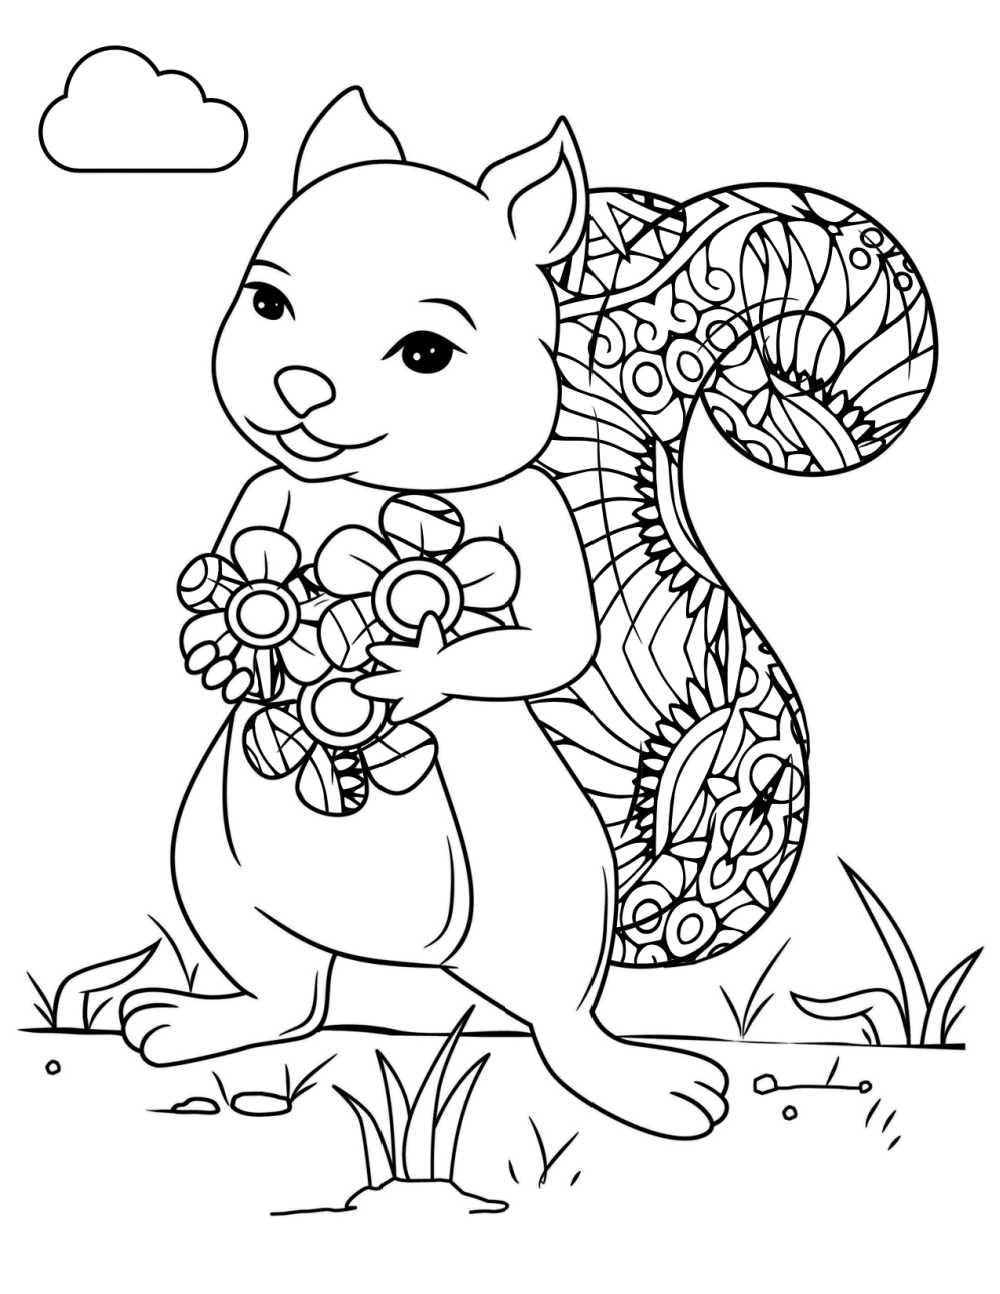 Free Printable Squirrel with Flowers Coloring Page   Mama Likes This